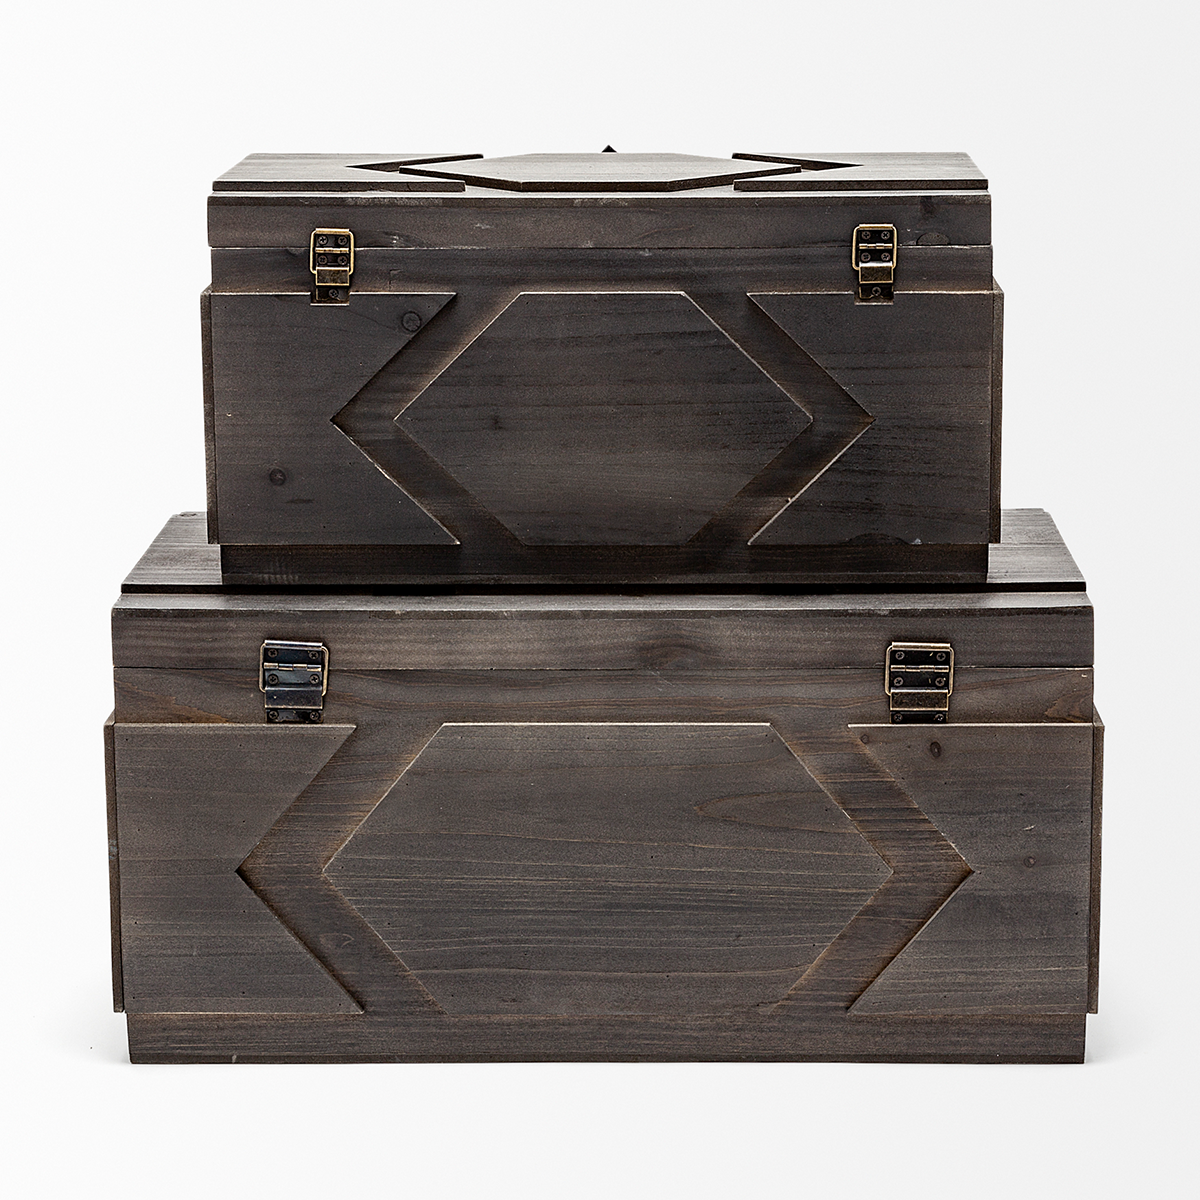 Cassia Brown Wooden Boxes - Set of 2